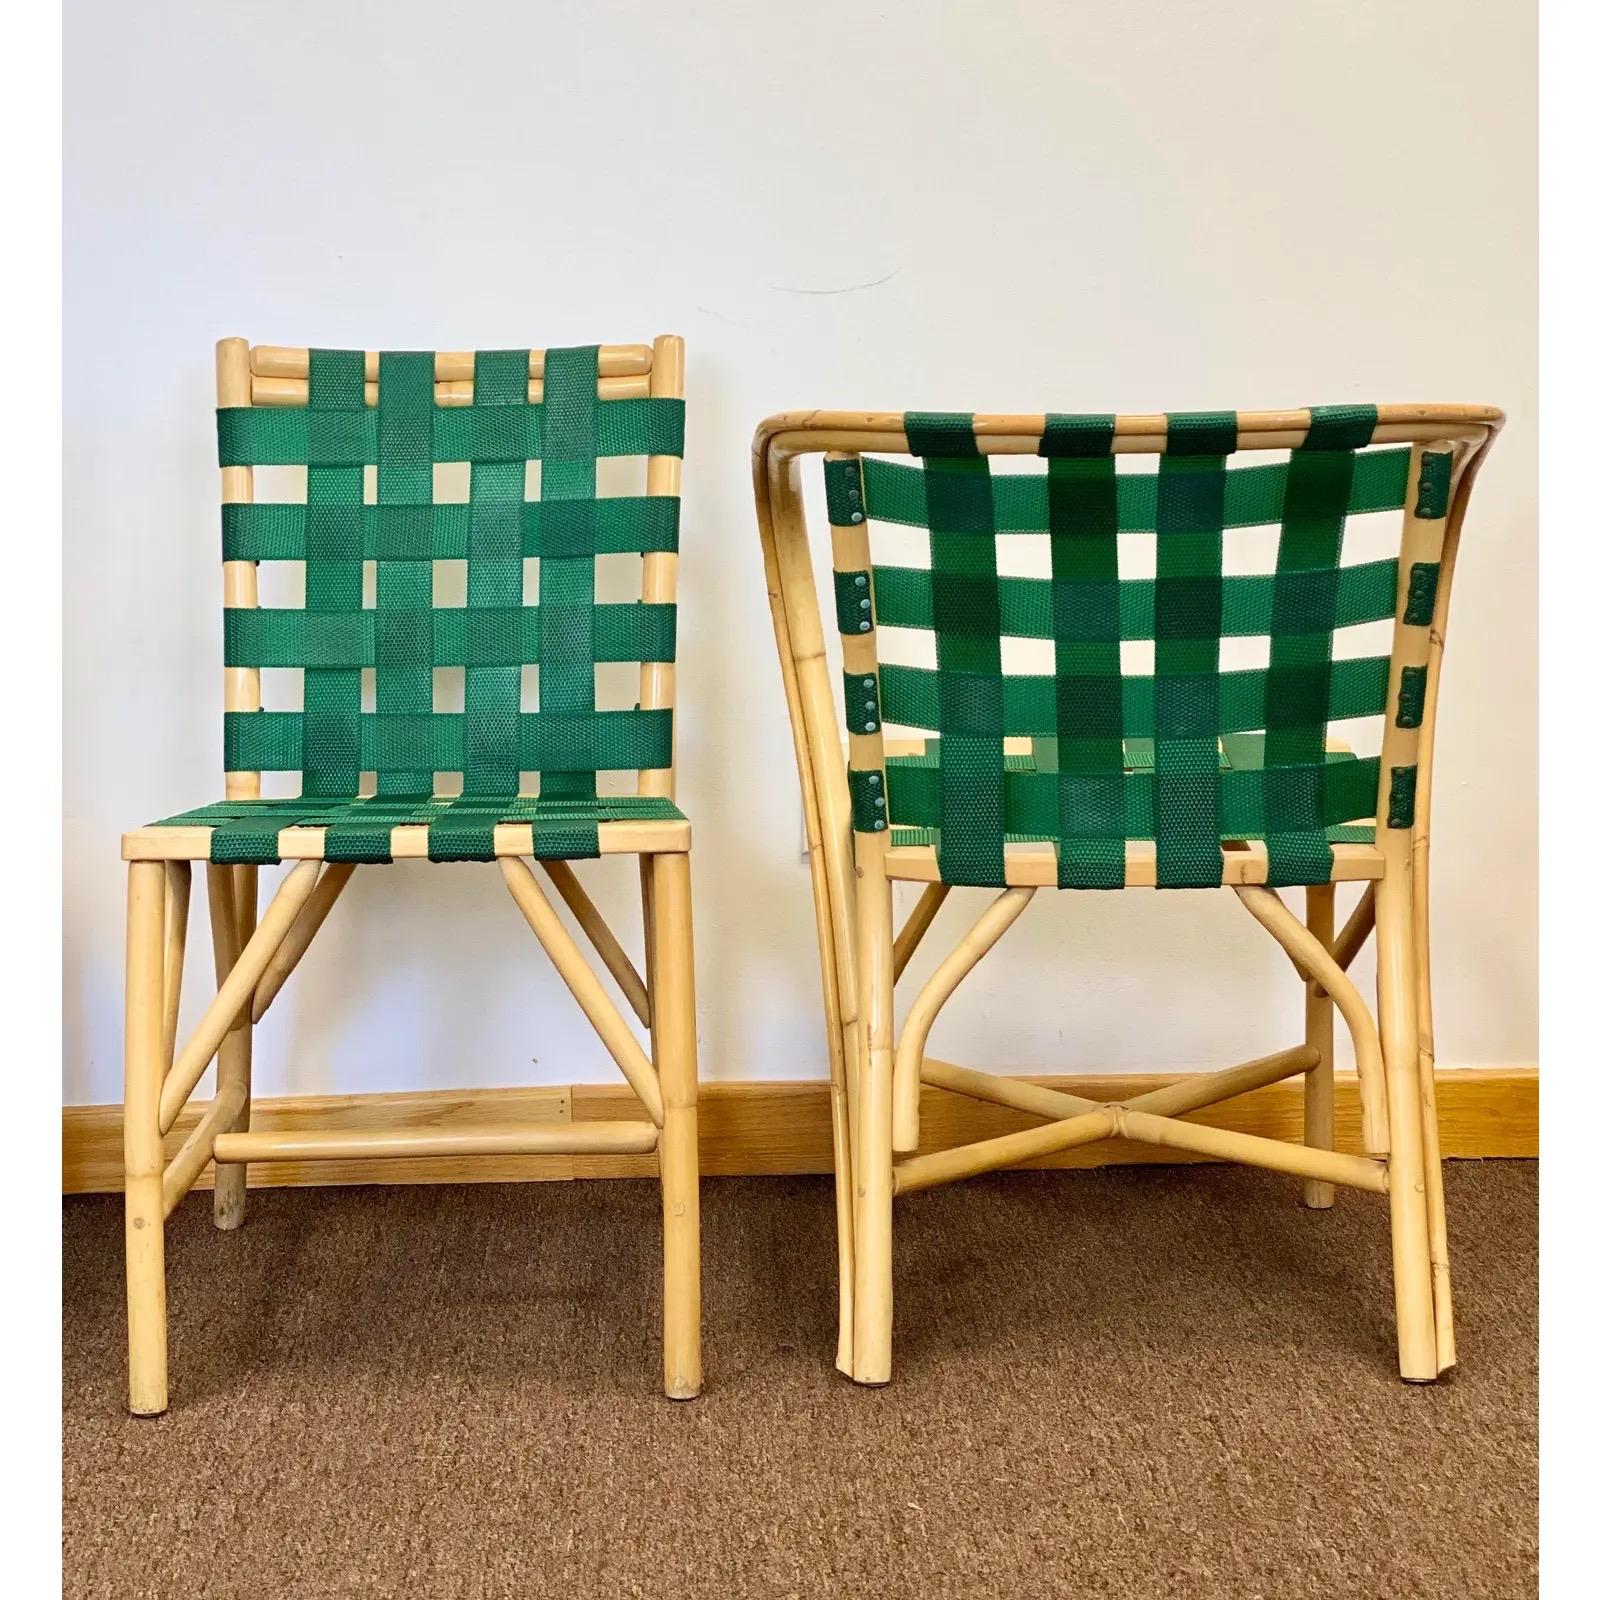 Late 20th Century 1970s Mid-Century Modern Sculptural Green Bamboo Dining Set, 5 Pieces